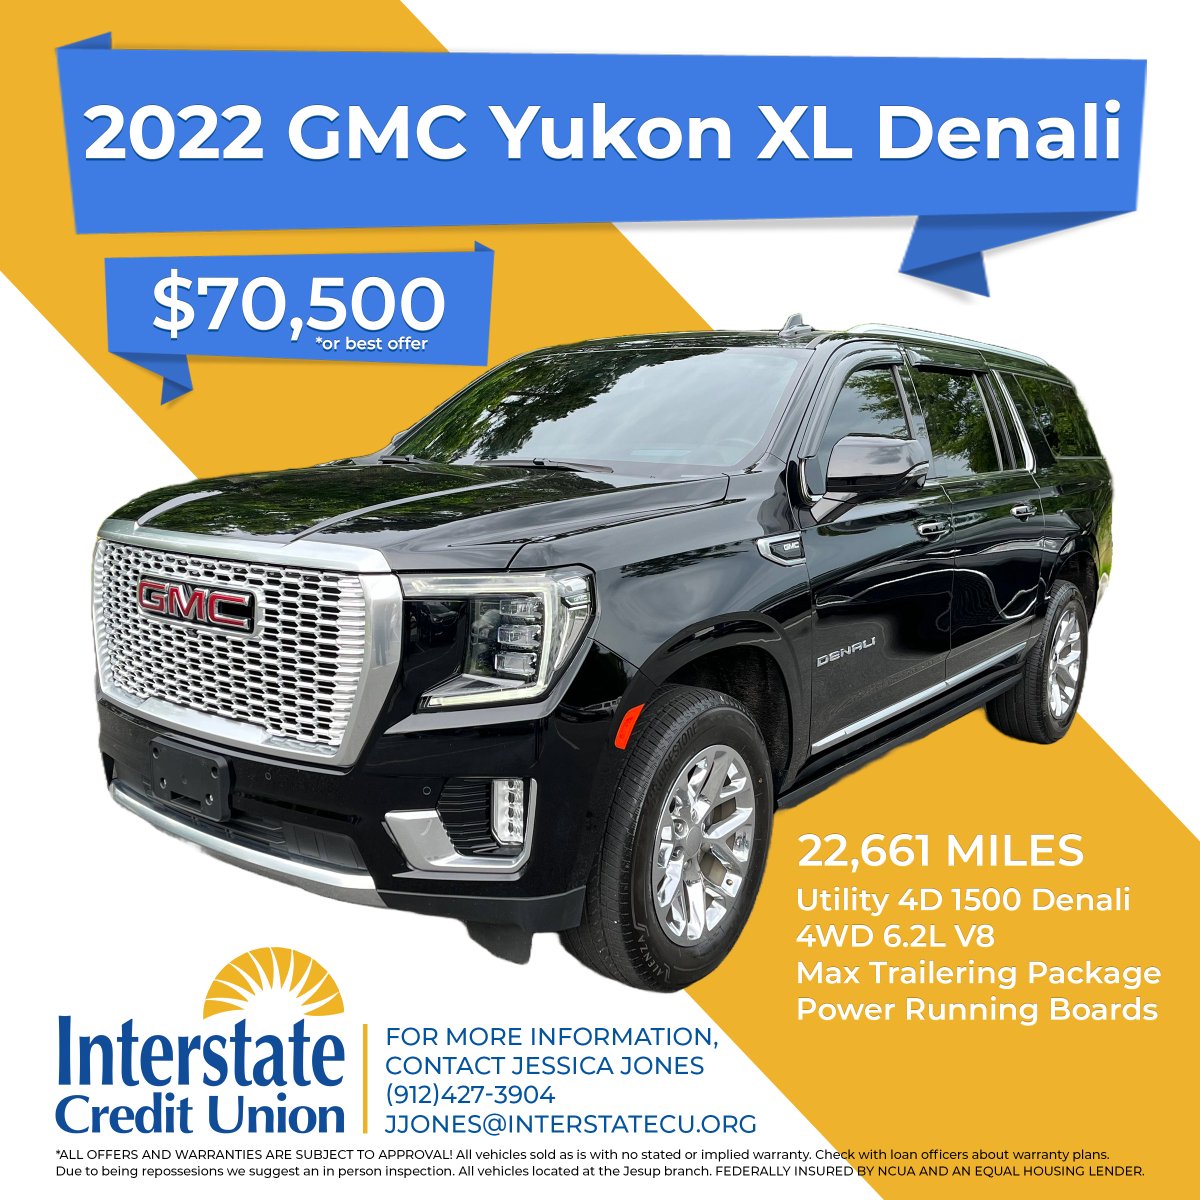 If only there was a whistle effect for this beautiful 2022 GMC Yukon XL Denali we have for sale! For more info, contact Jessica Jones (912)427-3904.

To view more repos for sale, visit our website: bit.ly/43scMLN 

#InterstateCreditUnion #InterstateCU #BetterBanking